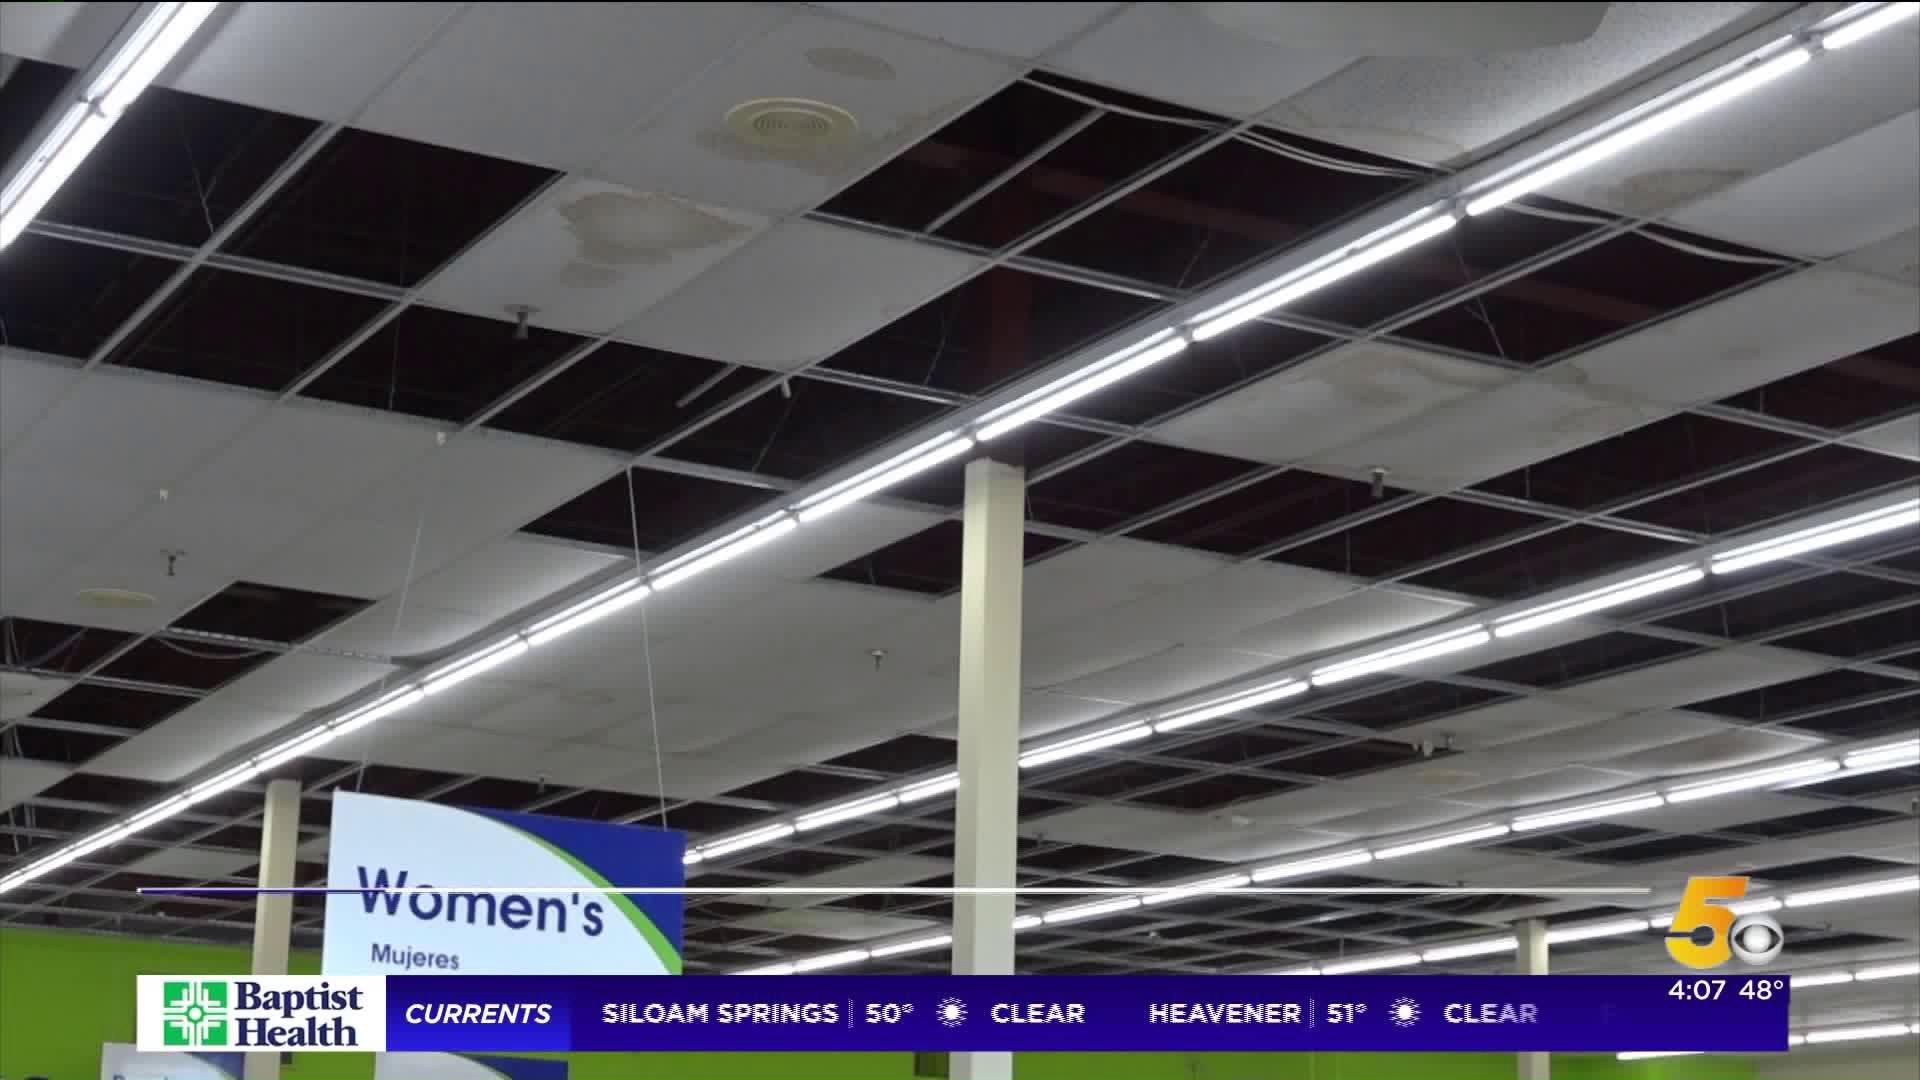 Goodwill Store In Siloam Springs To Reopen After Tornado Damage Causes Closure